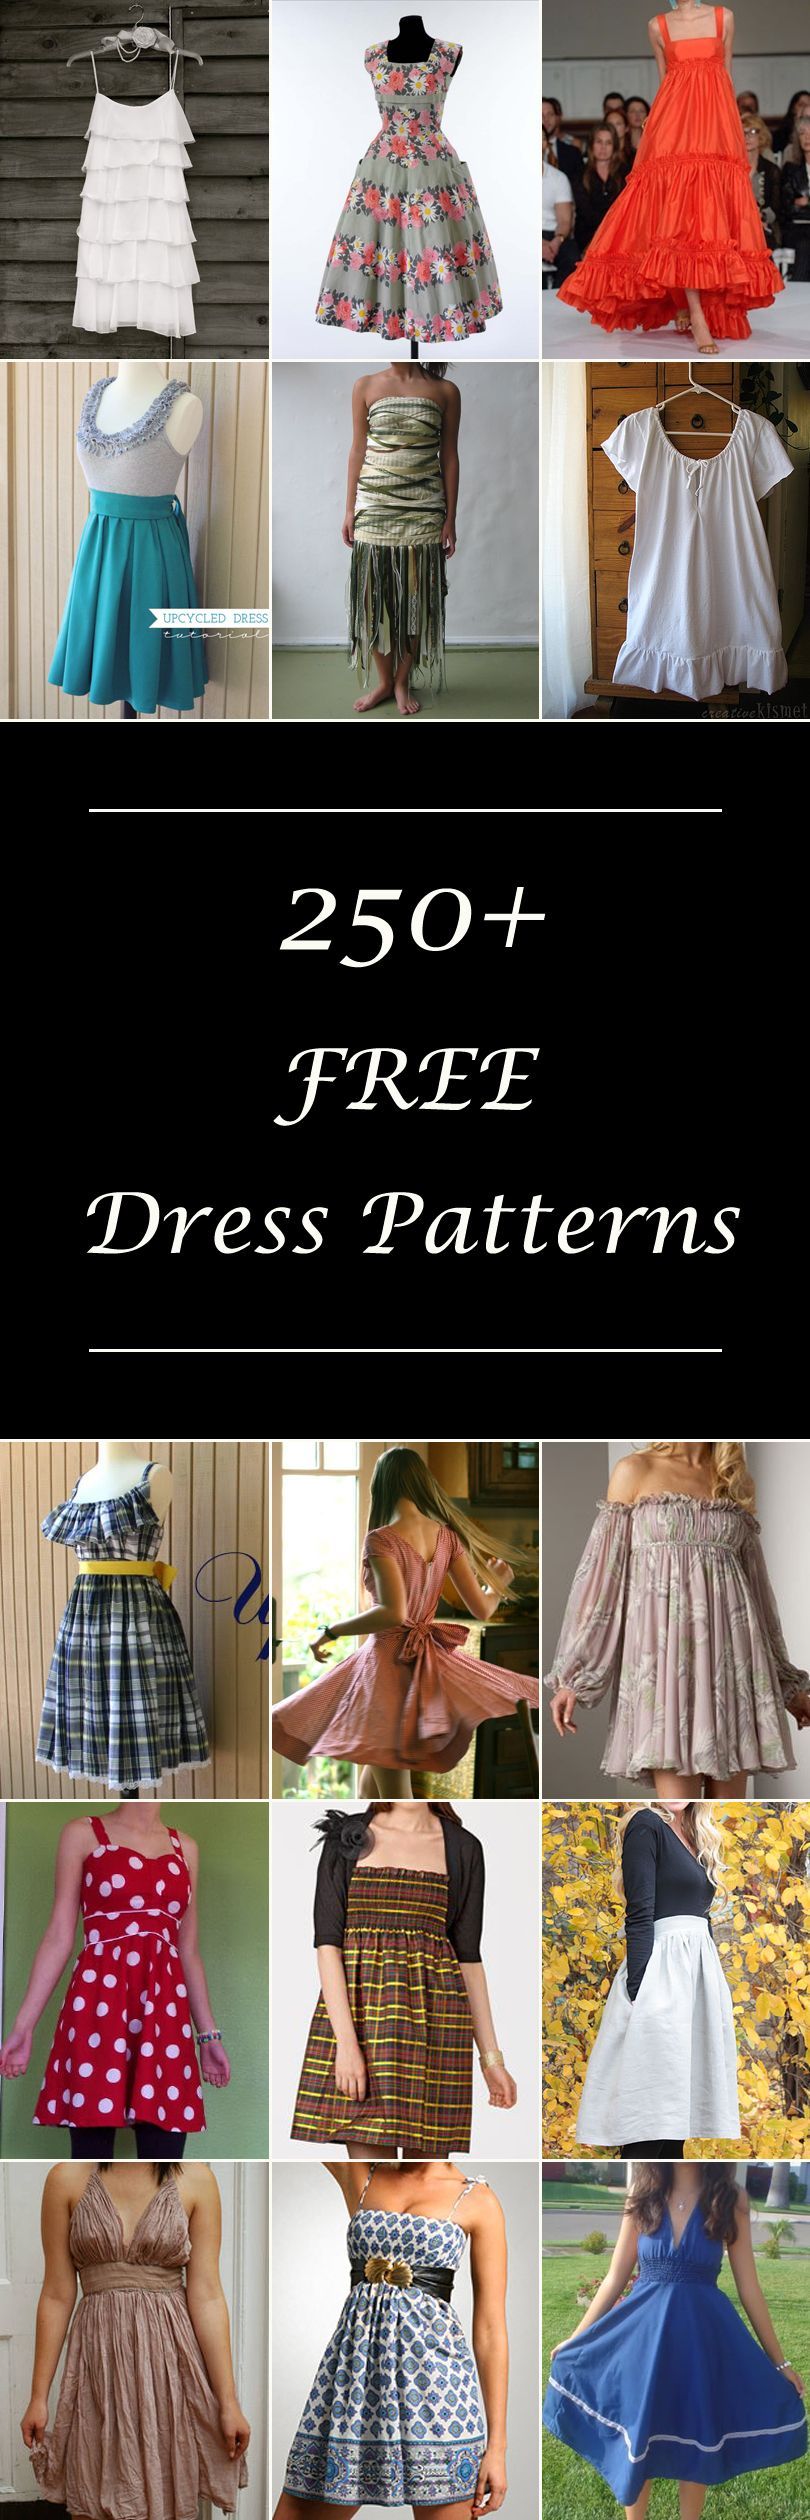 Lots of free women's dress patterns. Diy ideas for dresses, sewing tutorials & projects for women. Many simple & easy styles.